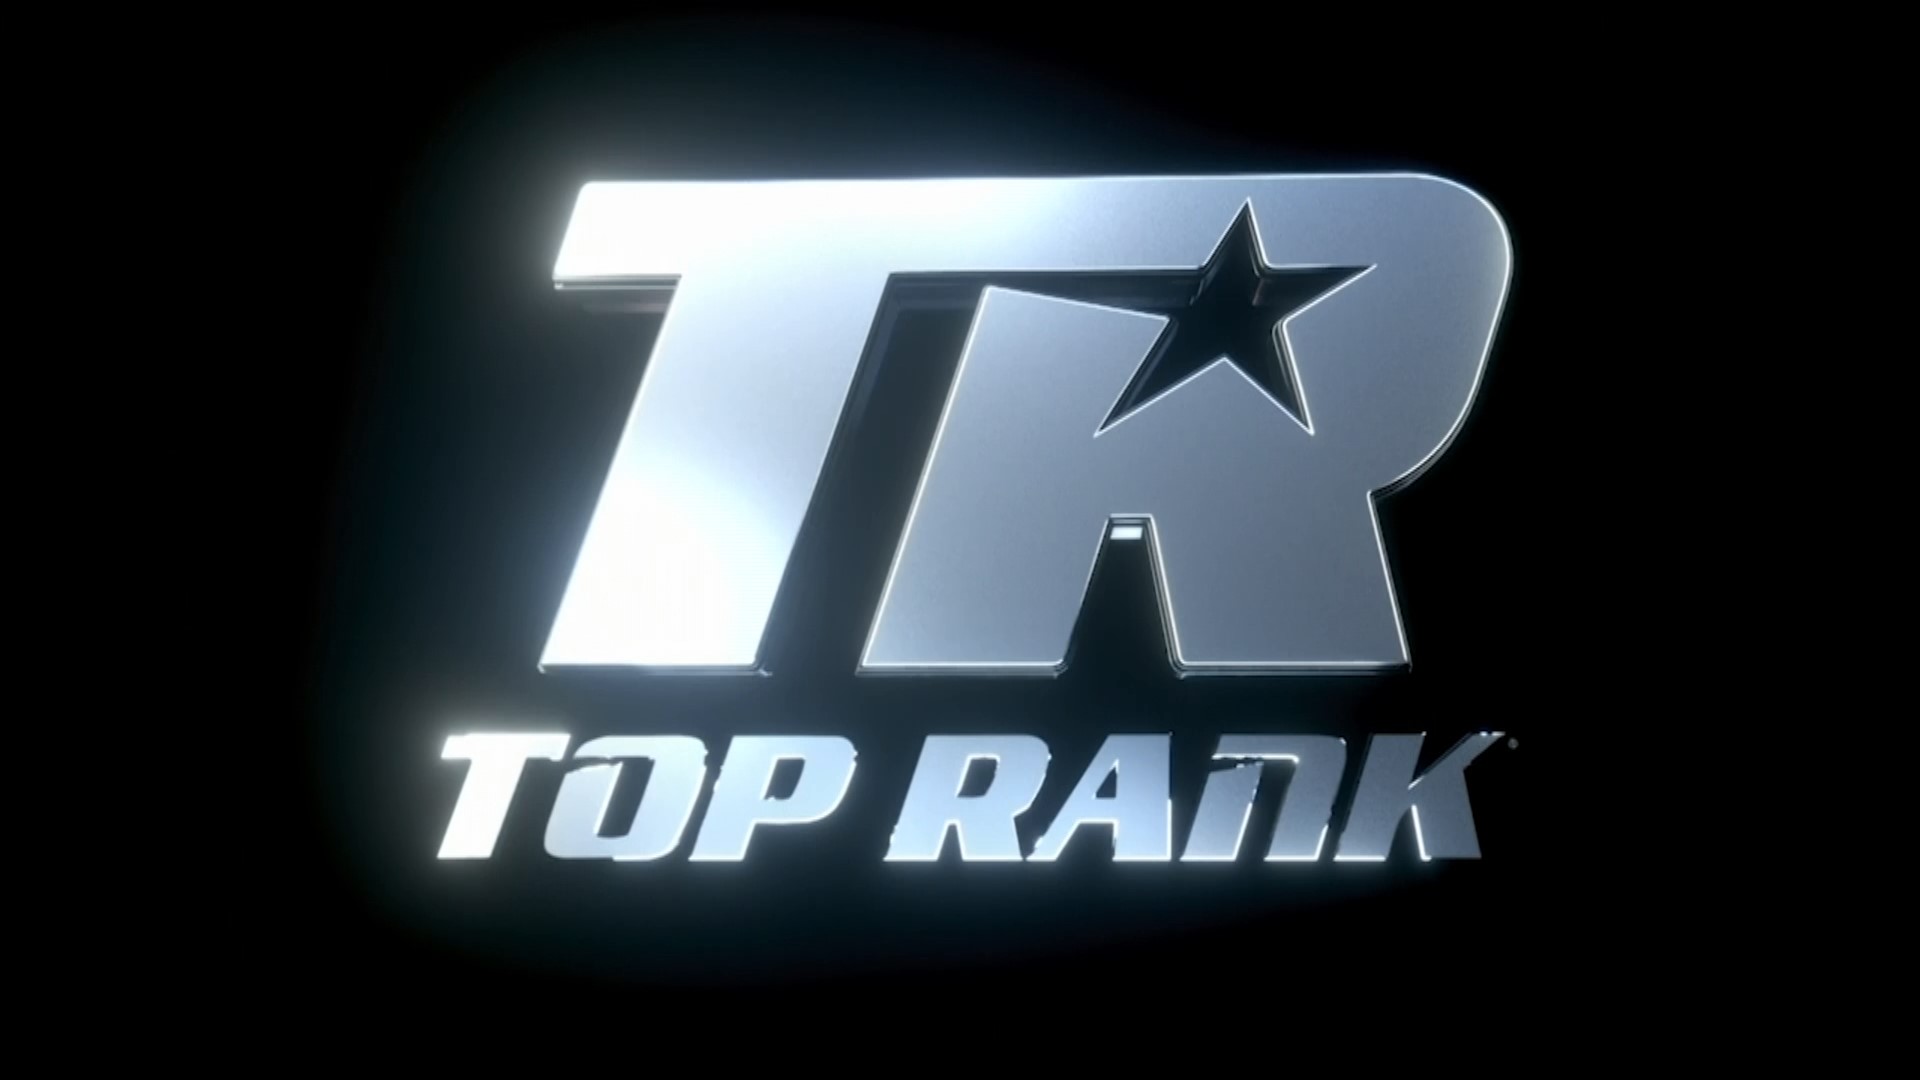 Top Rank Boxing 2020 06 11 1080i HDTV -WH - Wrestling-Home